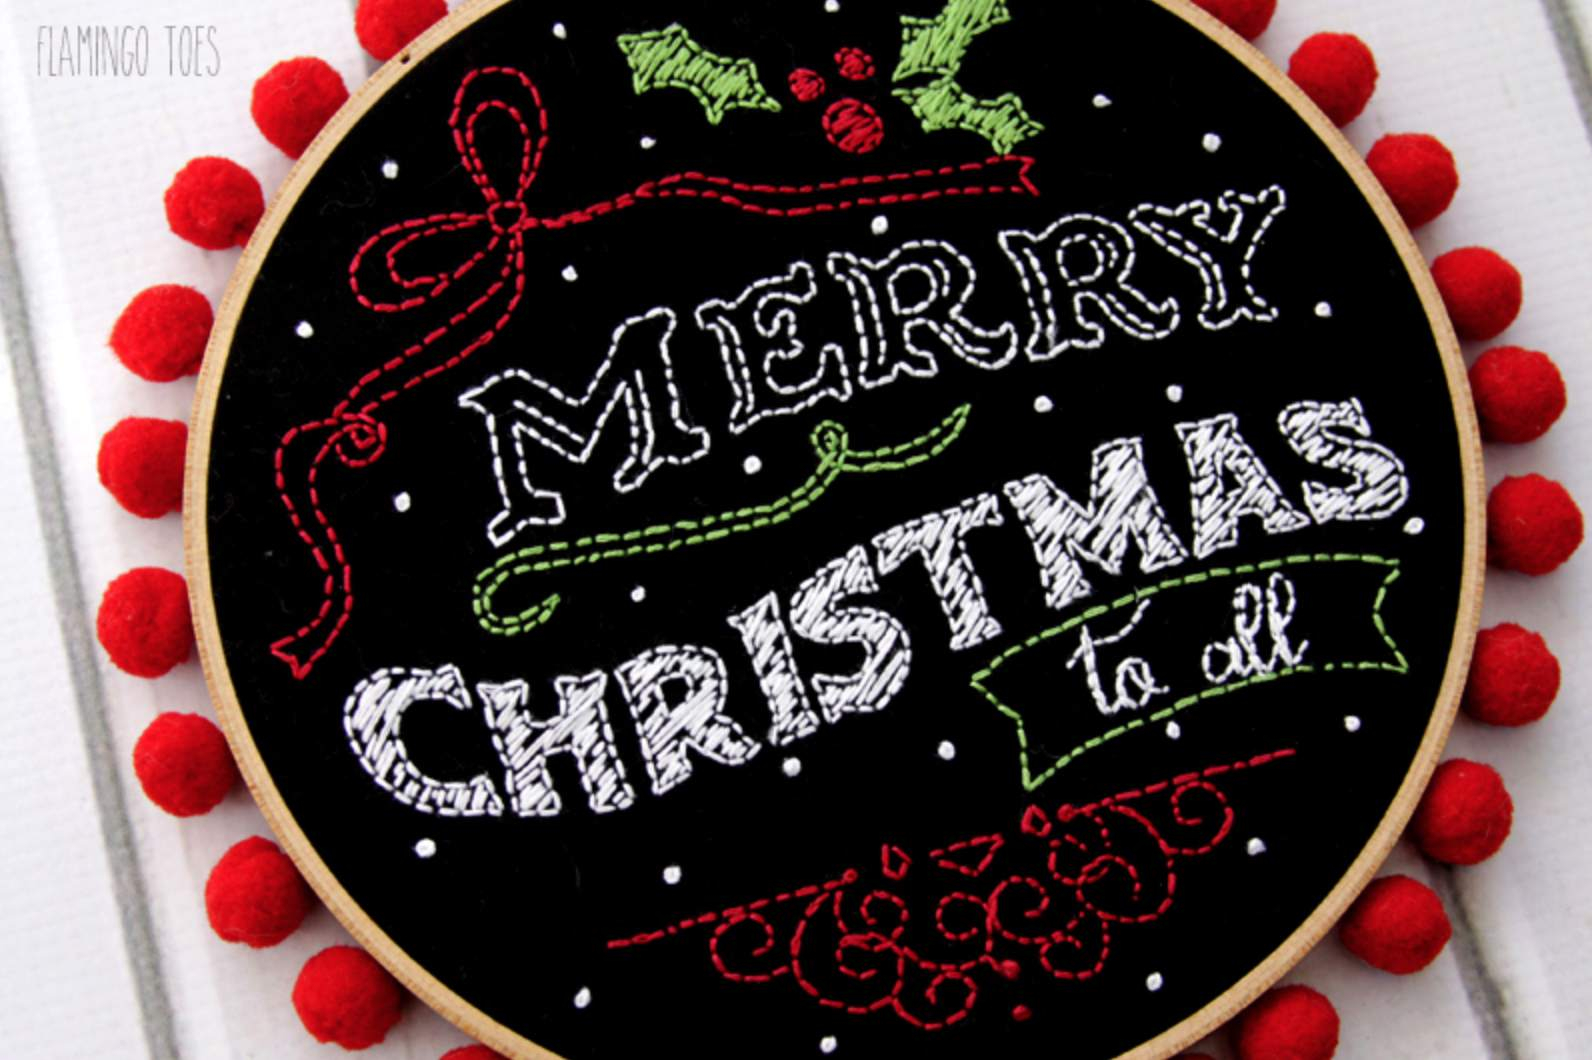 Hand Embroidery Christmas Patterns 10 Free Christmas Hand Embroidery Patterns